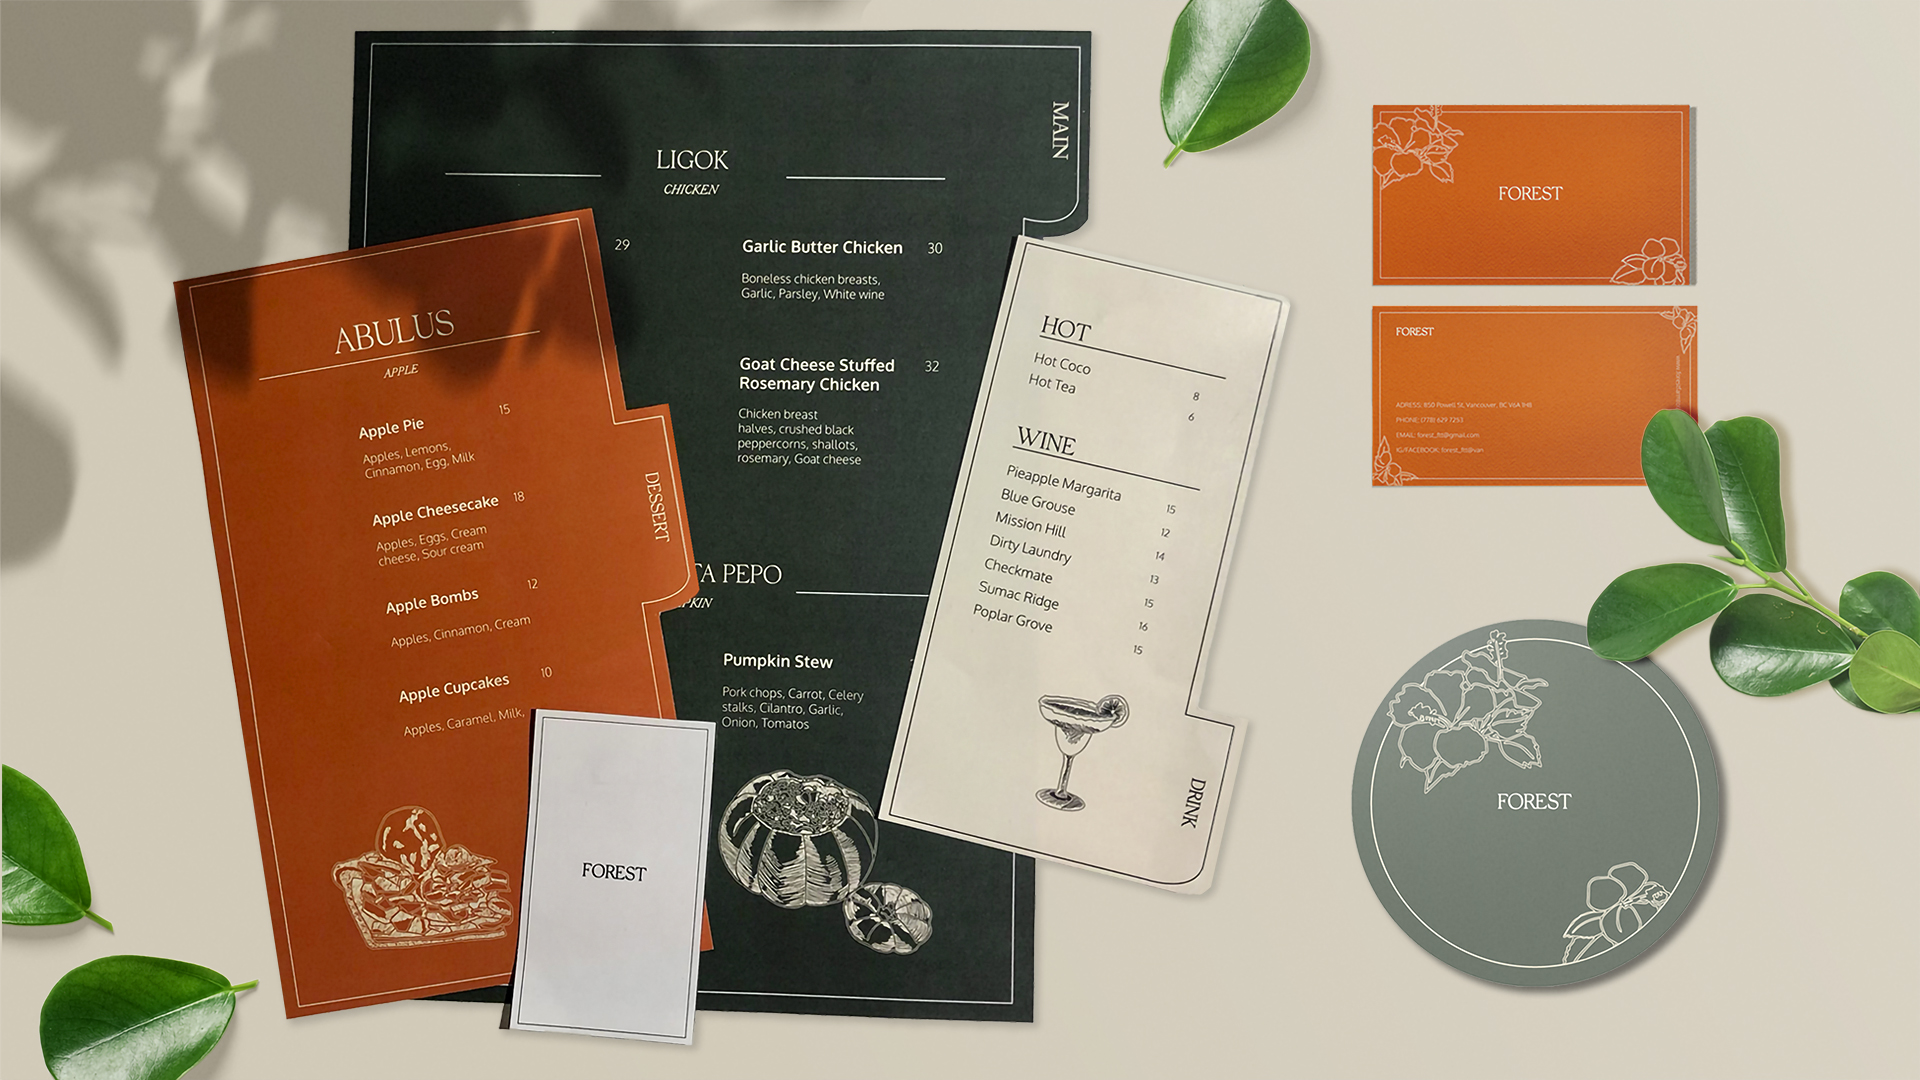 A display of farm-to-table restaurant menus, coaster, and business card.